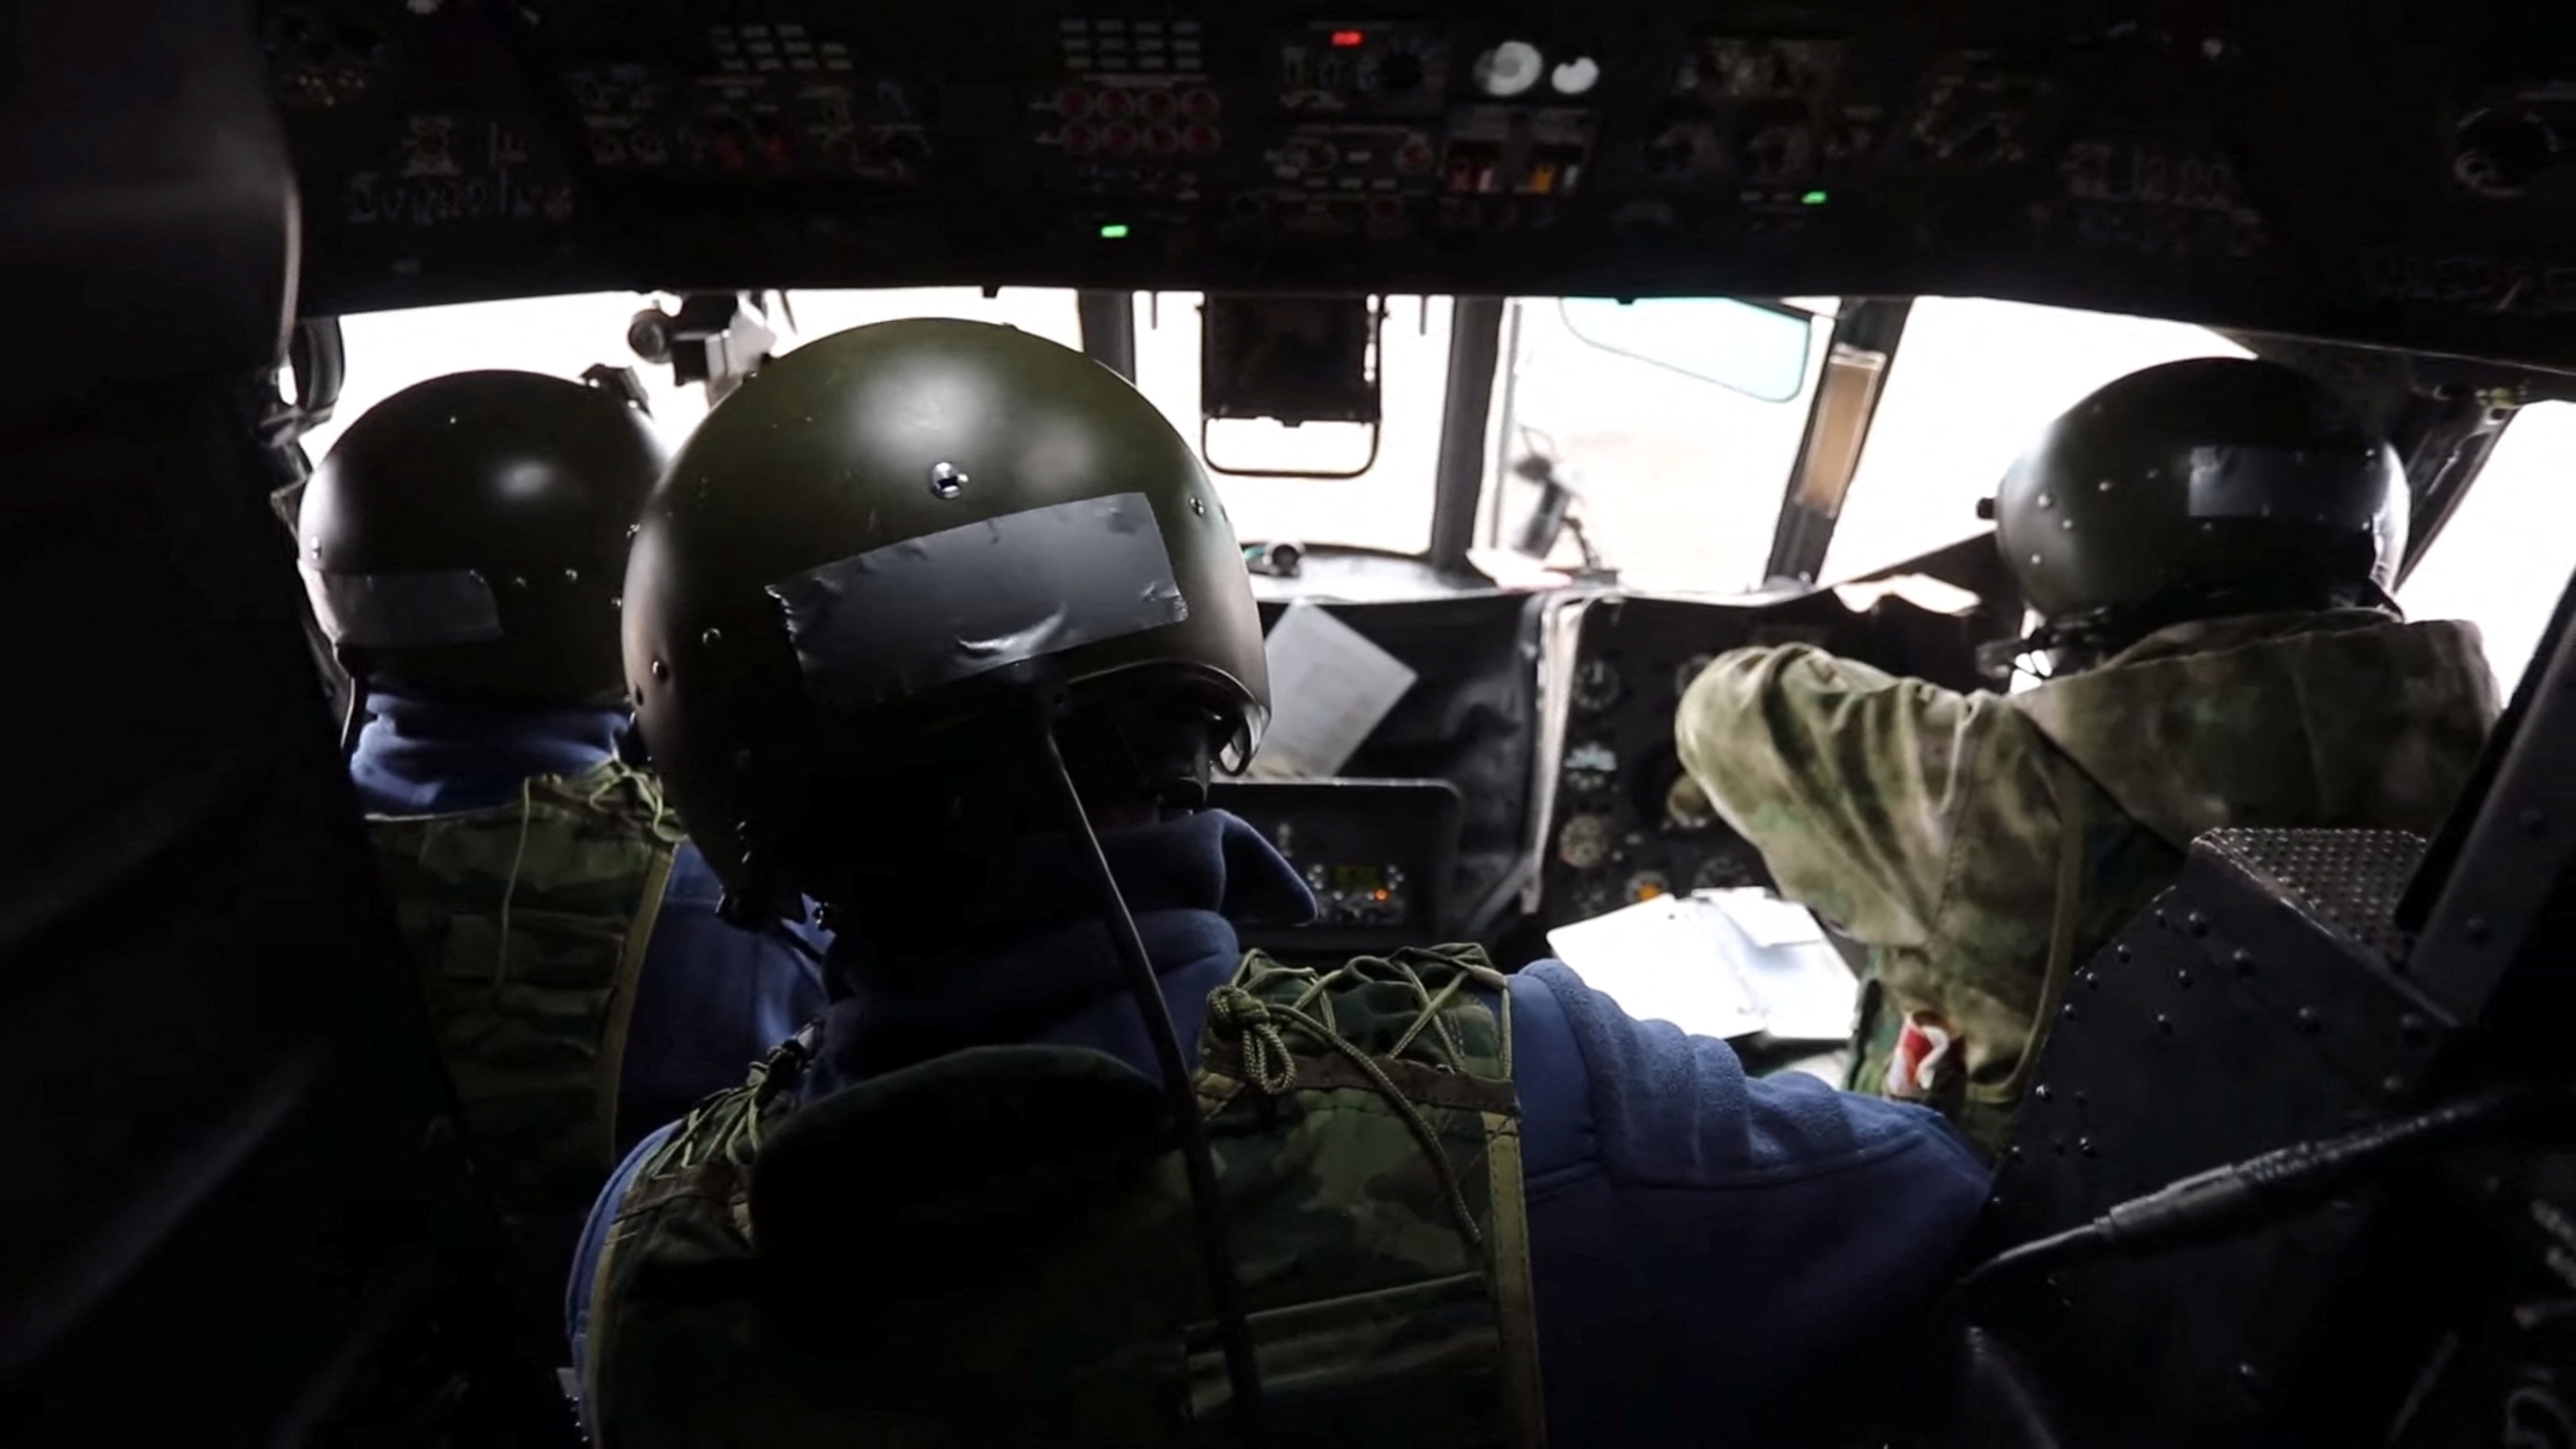 Army aviation helicopters escort units of Russian Armed Forces in Ukraine